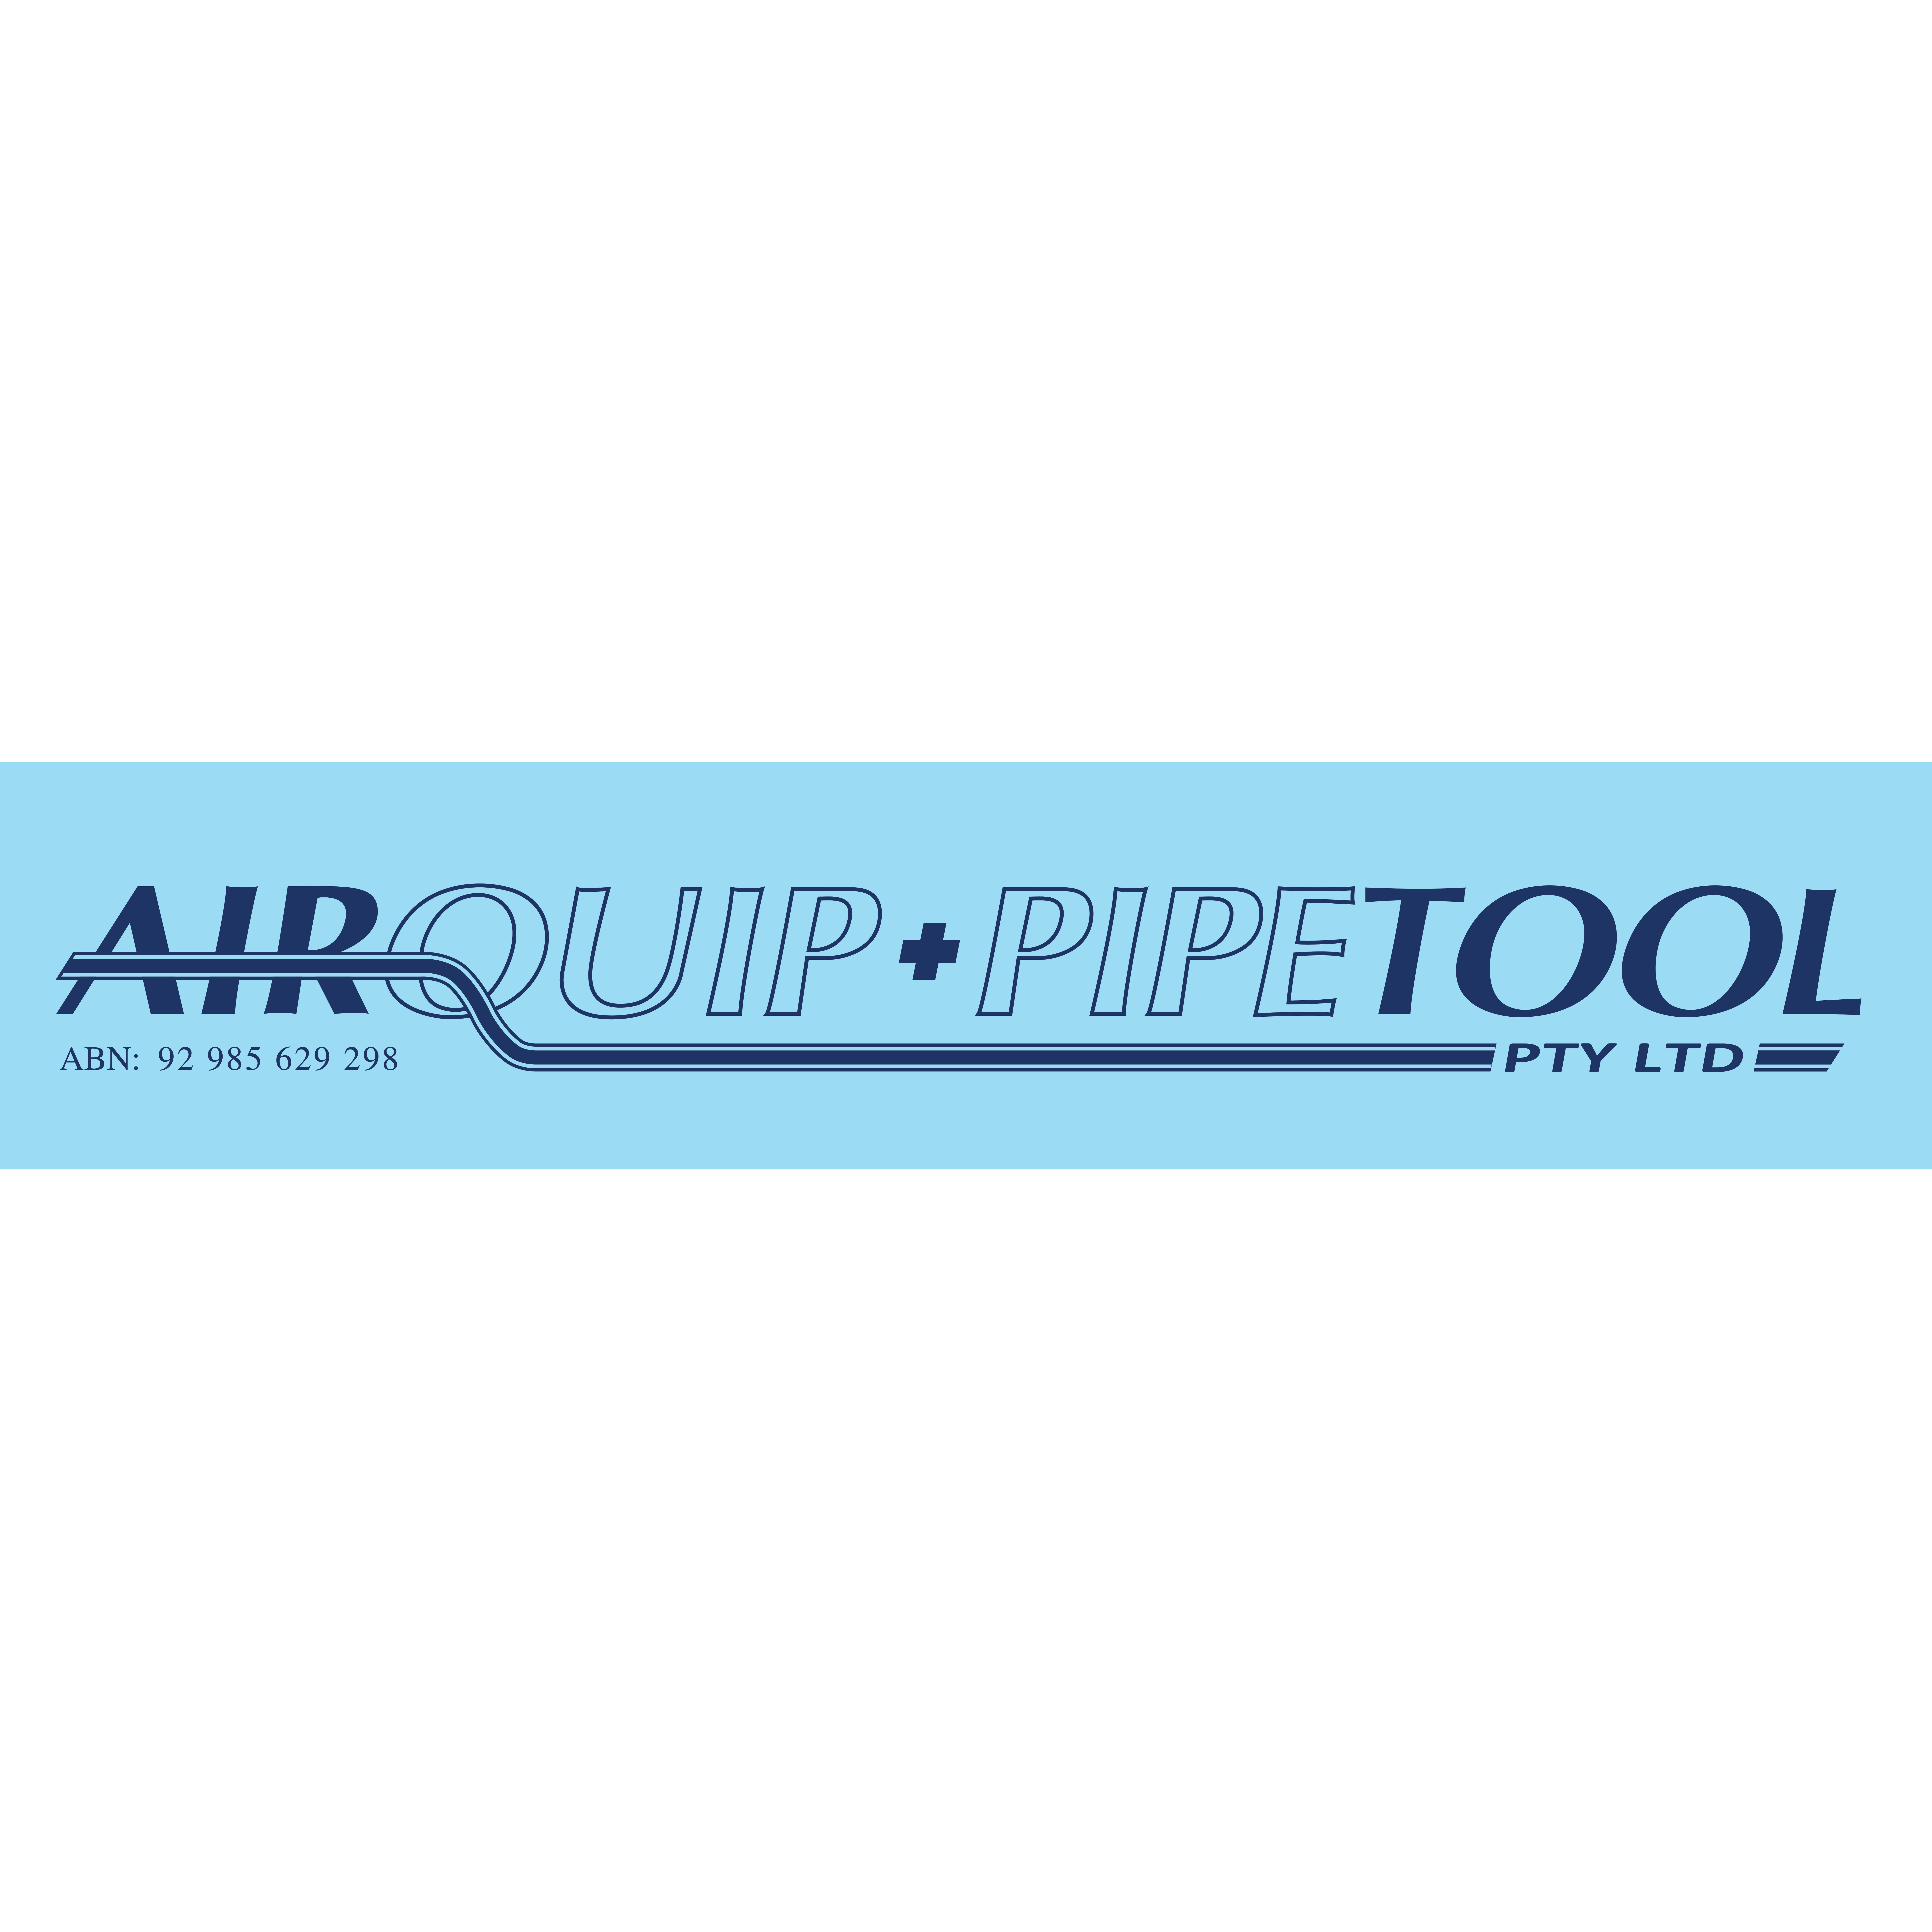 Airquip and Pipetool Pty Ltd - Mount Barker, SA 5251 - (08) 8398 5111 | ShowMeLocal.com